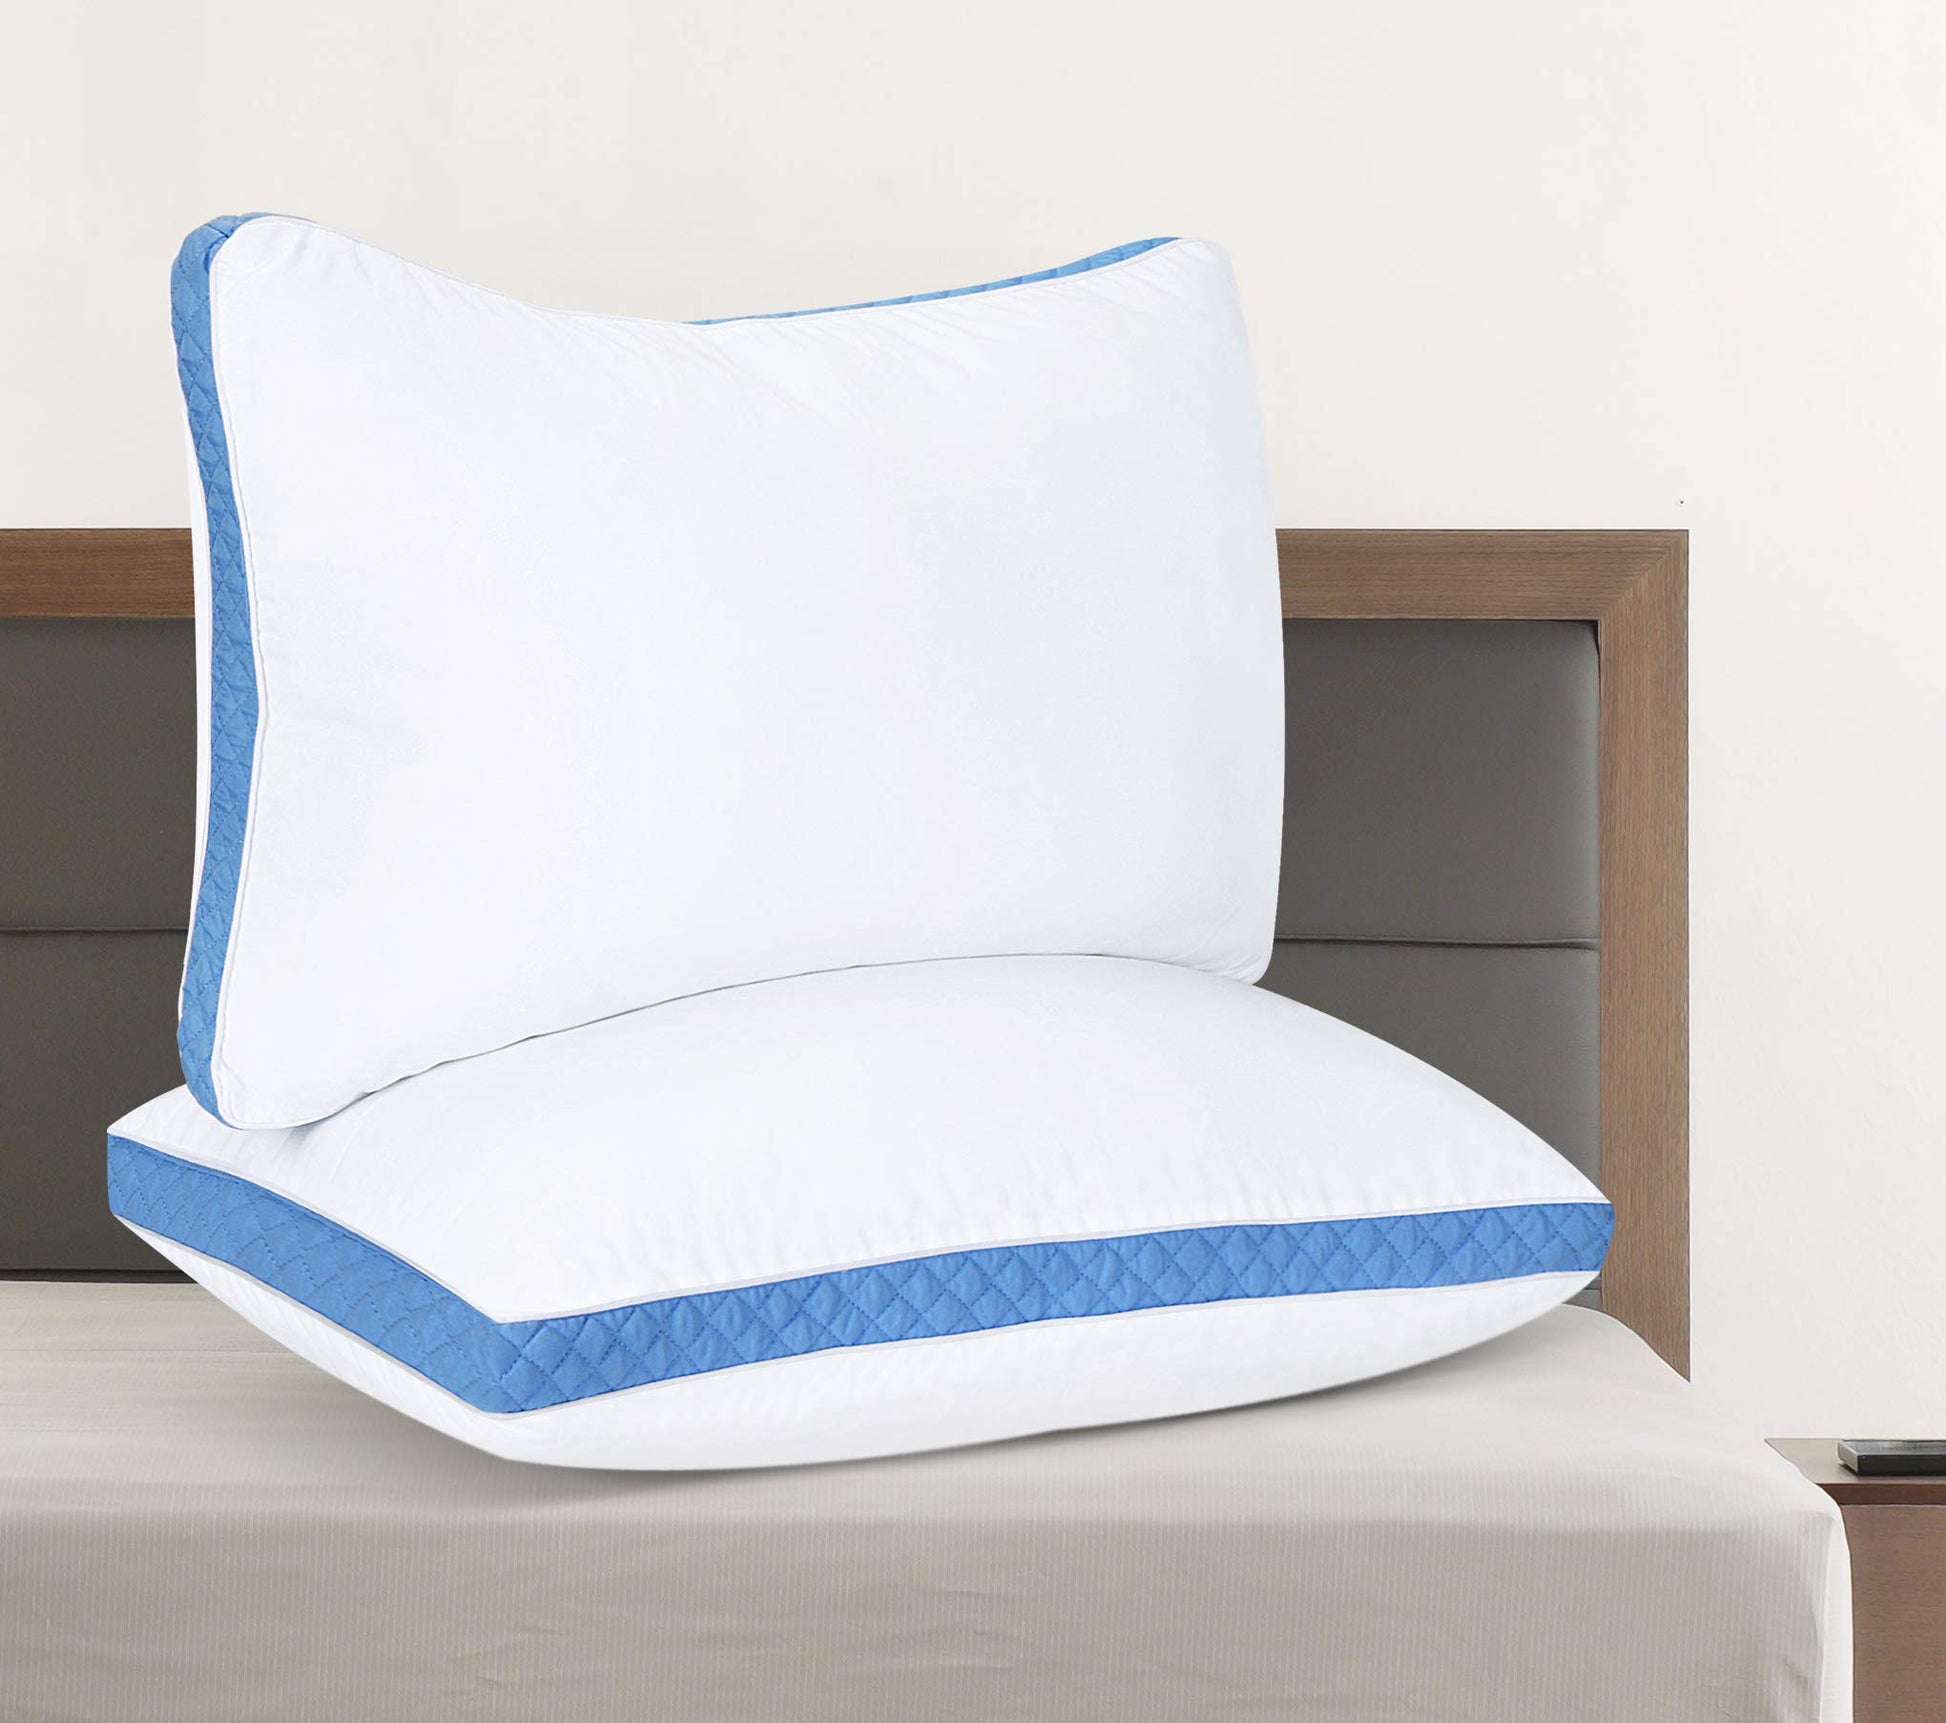 Utopia Bedding Bed Pillows for Sleeping Queen Size (Blue), Set of 2,  Cooling Hotel Quality, Gusseted Pillow for Back, Stomach or Side Sleepers